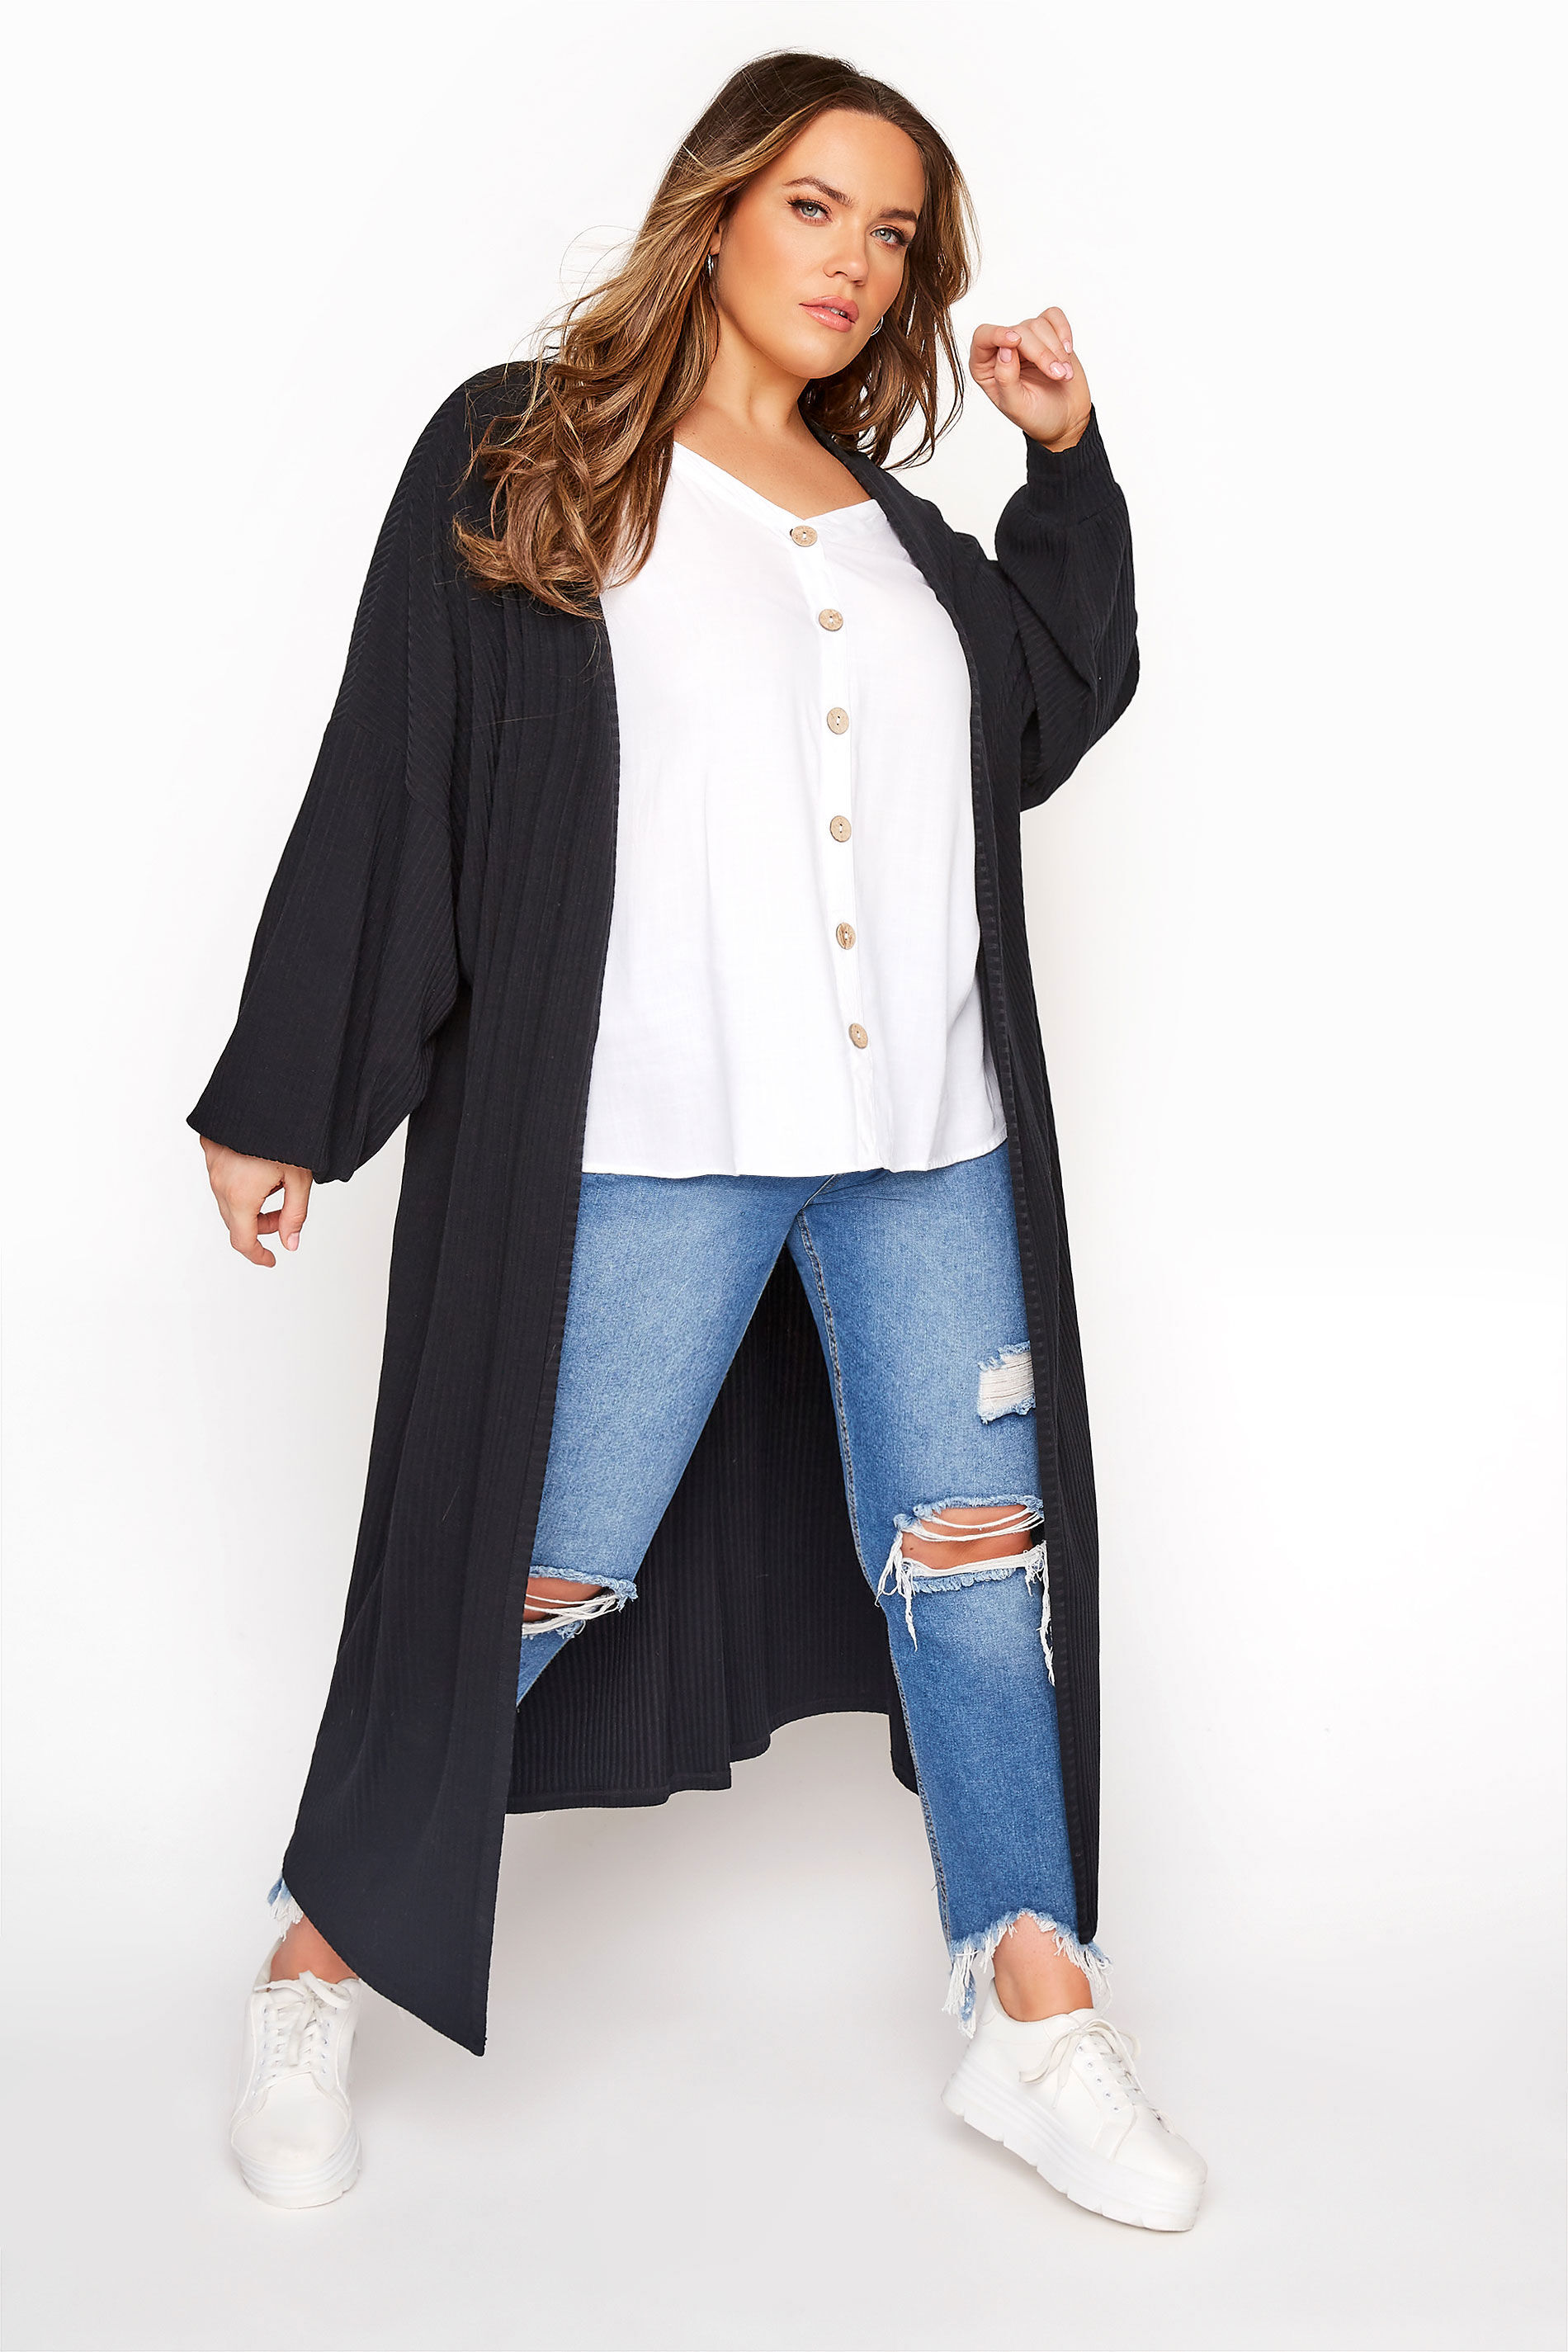 Yours Clothing Plus size limited collection black long cardigan 14